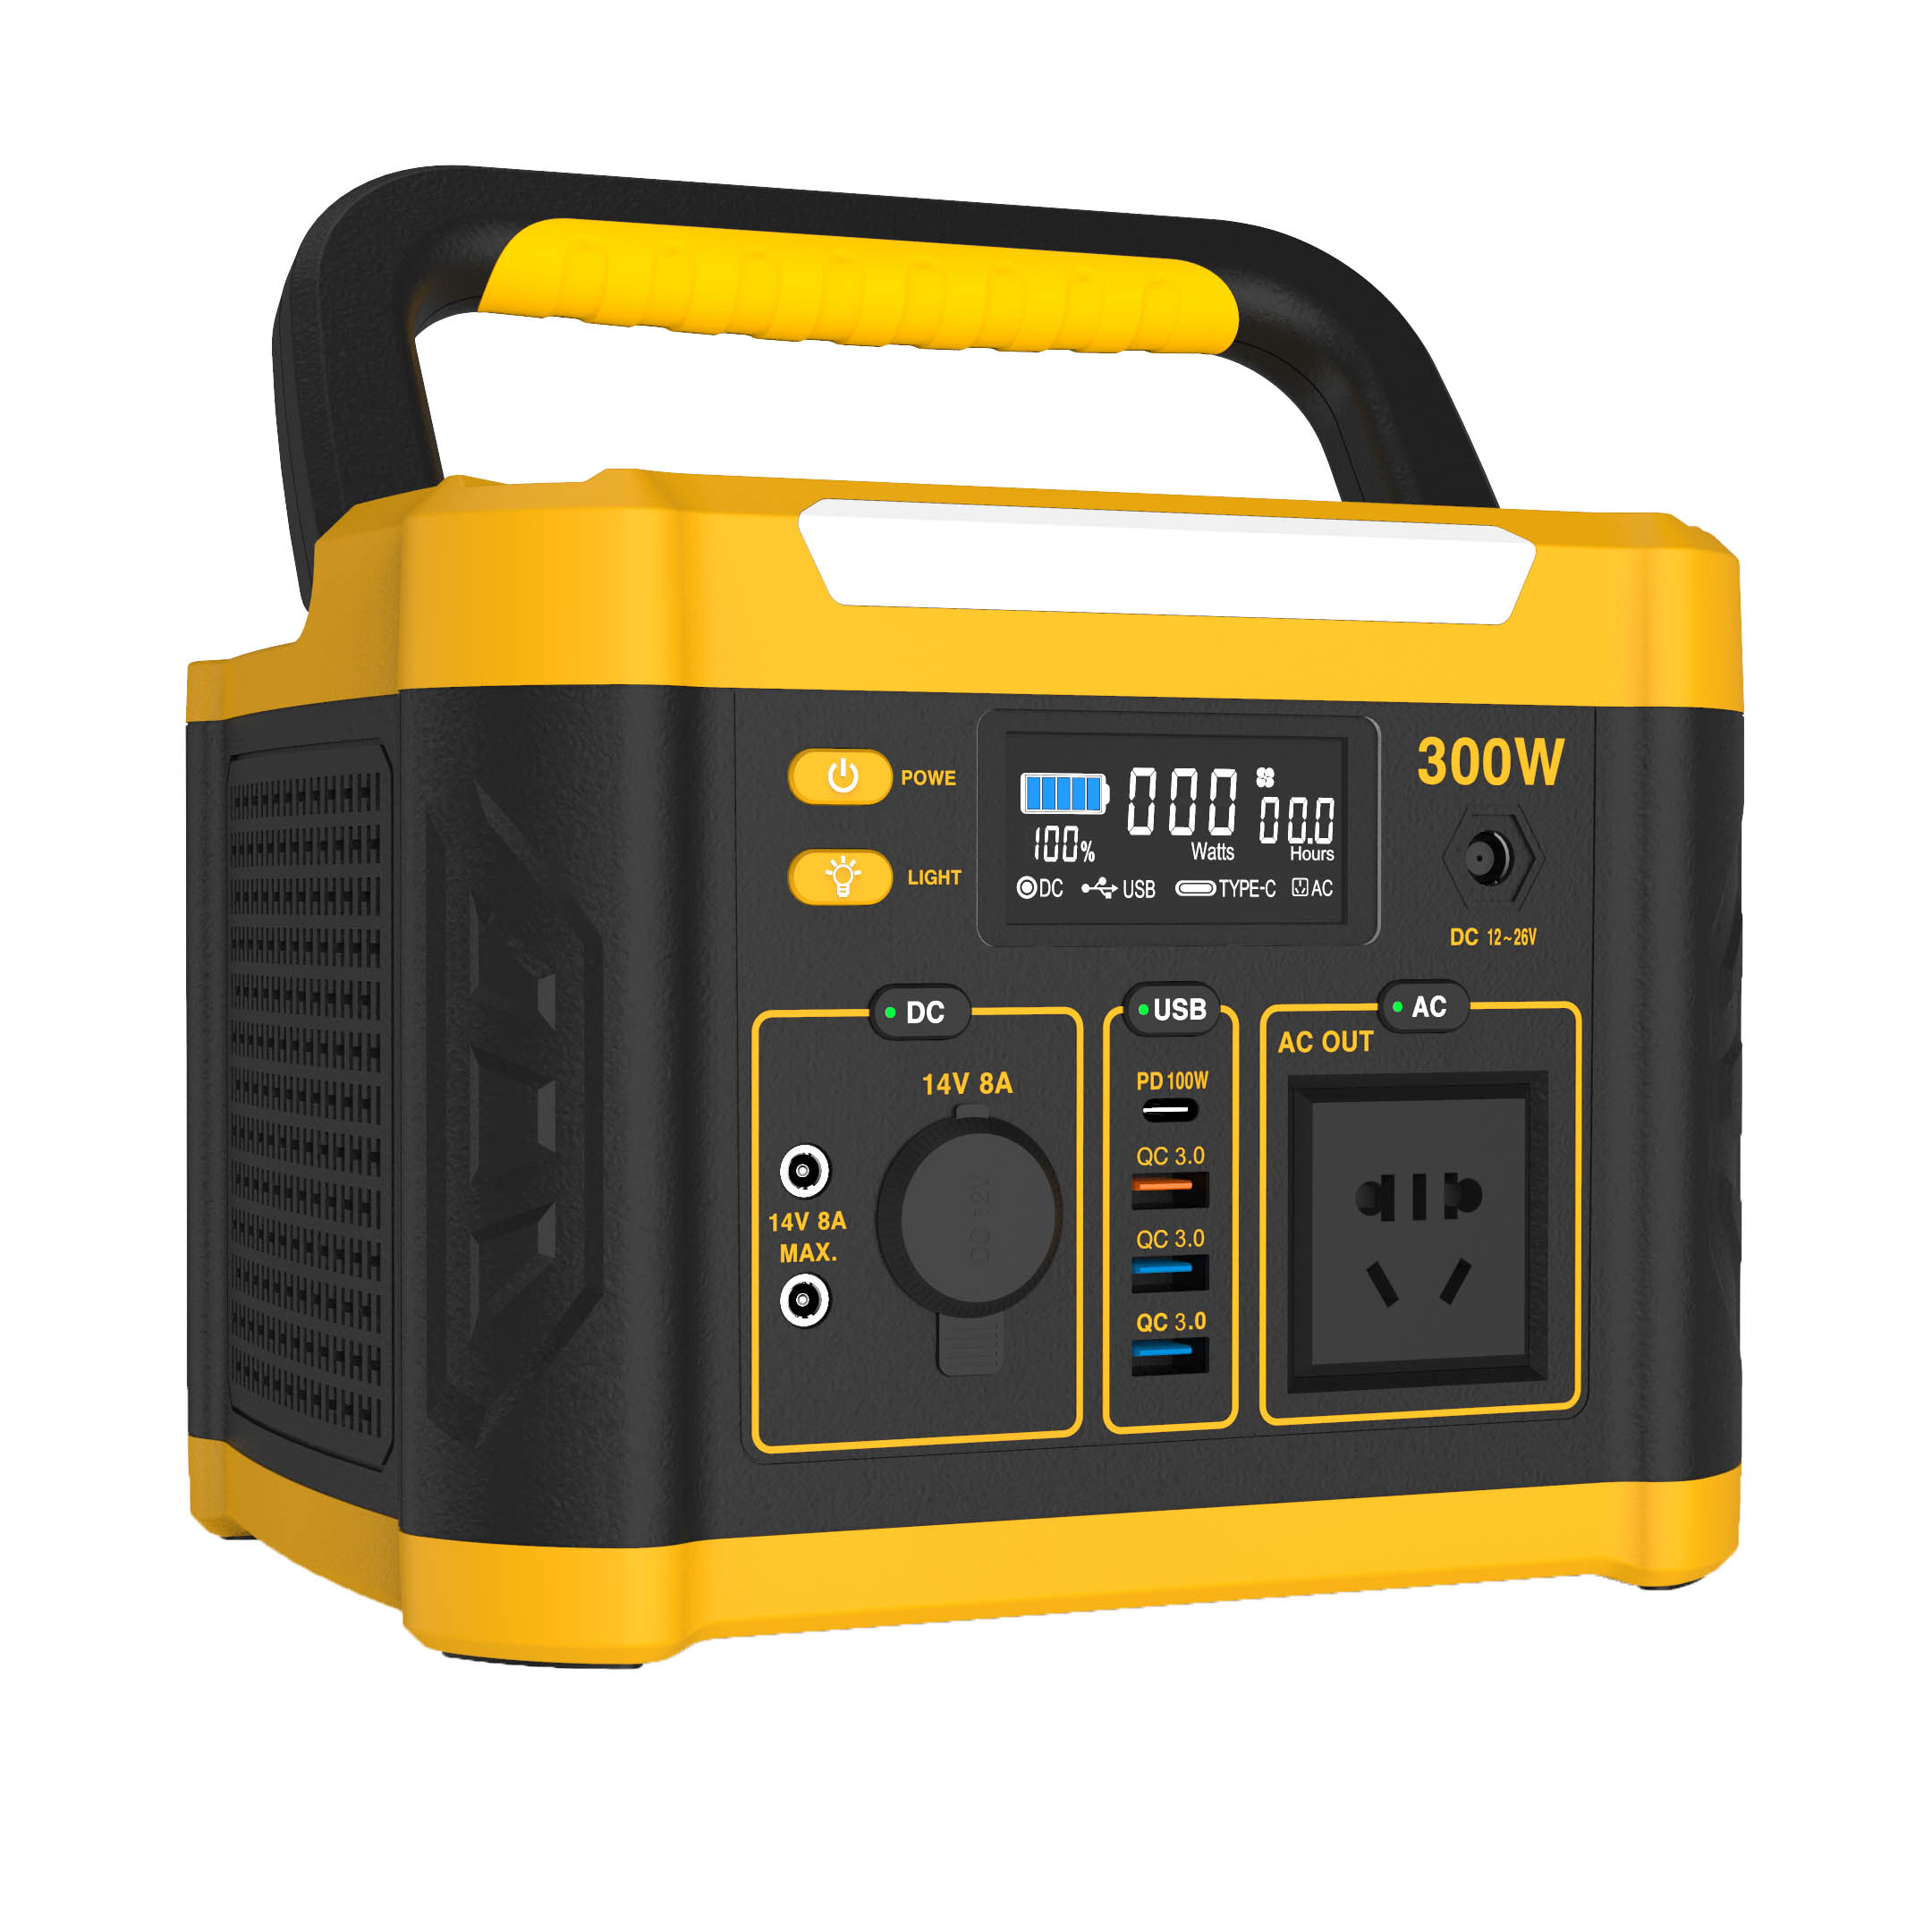 What is the difference between a portable UPS power supply and an emergency power supply?